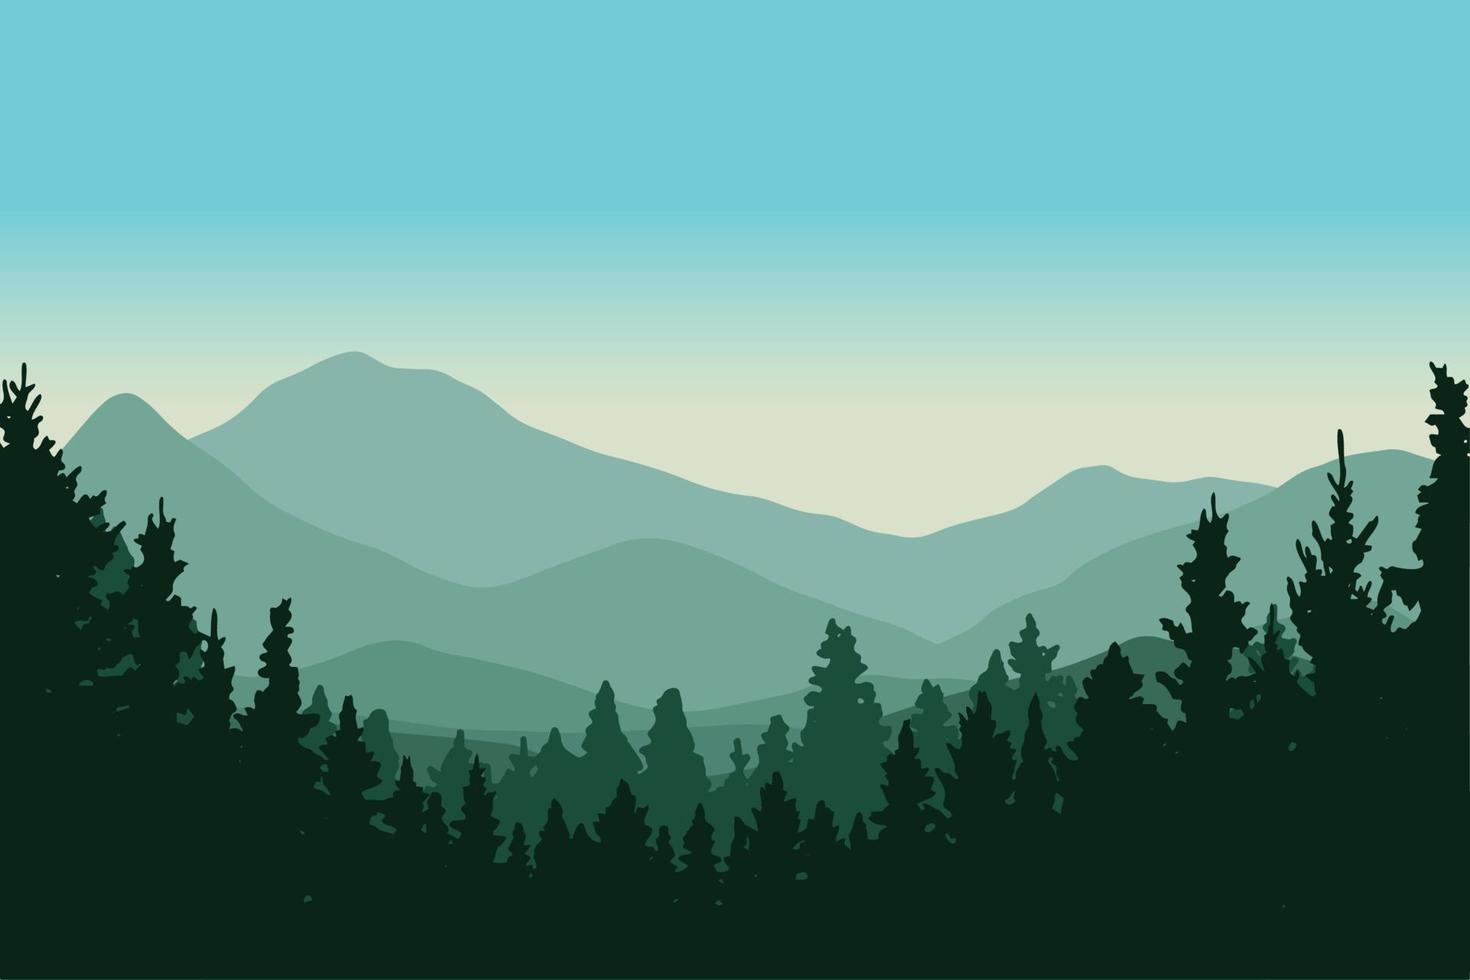 mountain pine forest silhouette vector